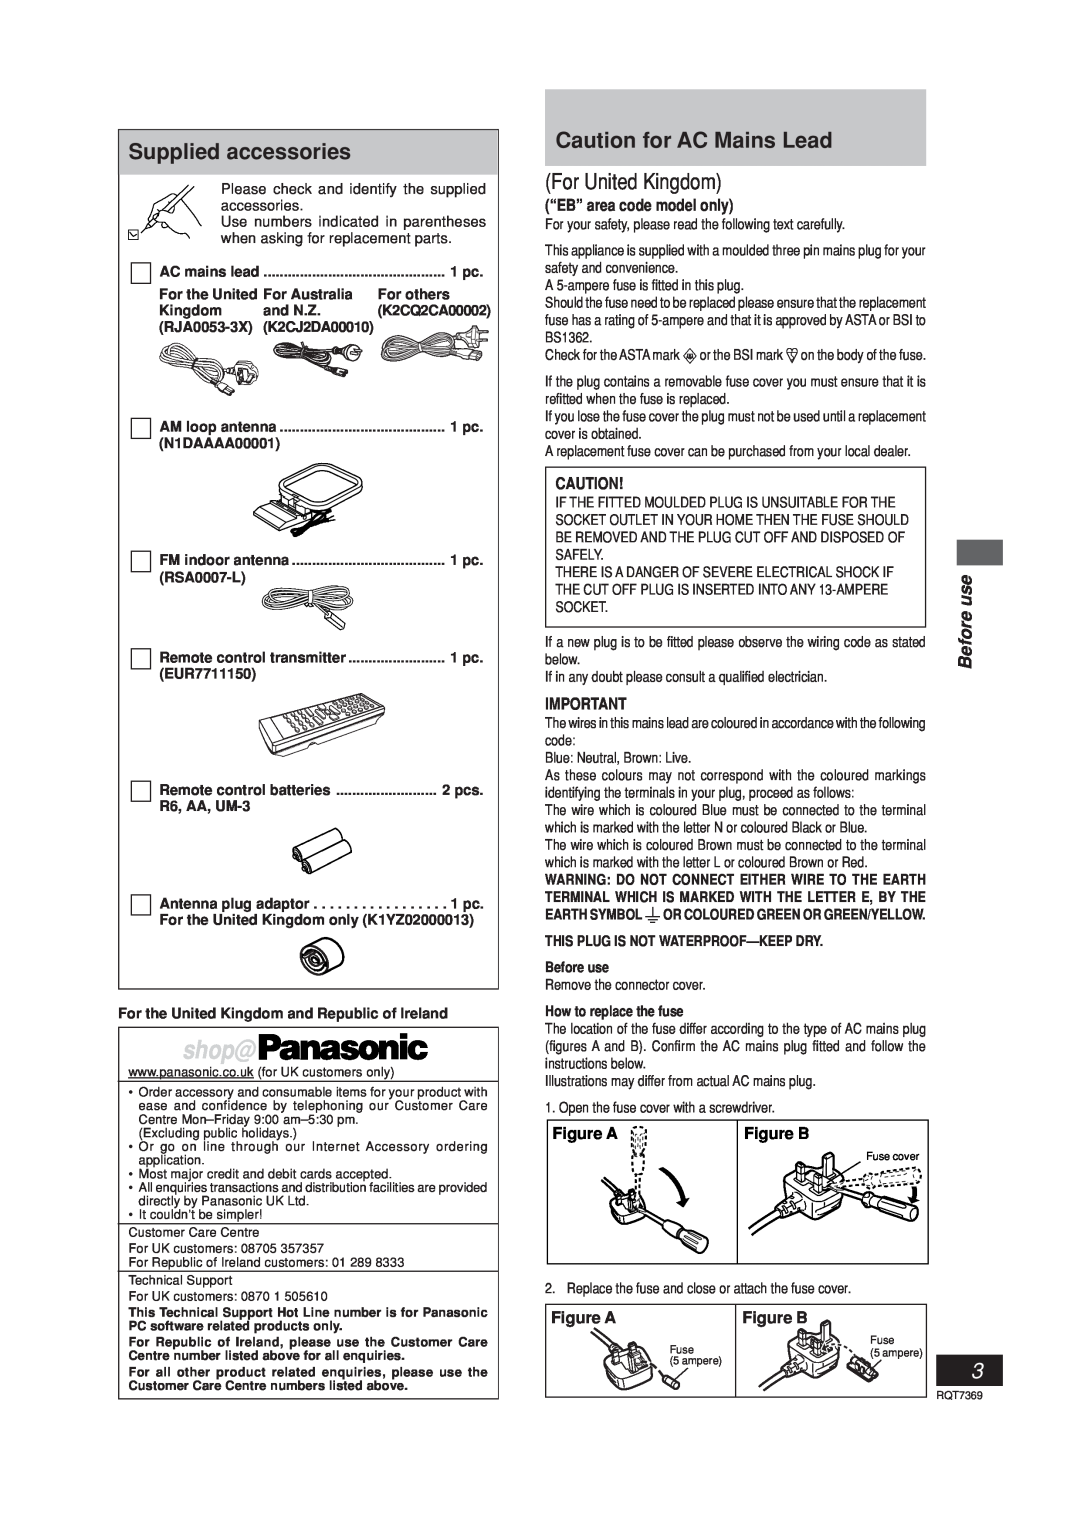 Panasonic SCPM19 Supplied accessories, Caution for AC Mains Lead, For United Kingdom, “EB” area code model only, Figure A 